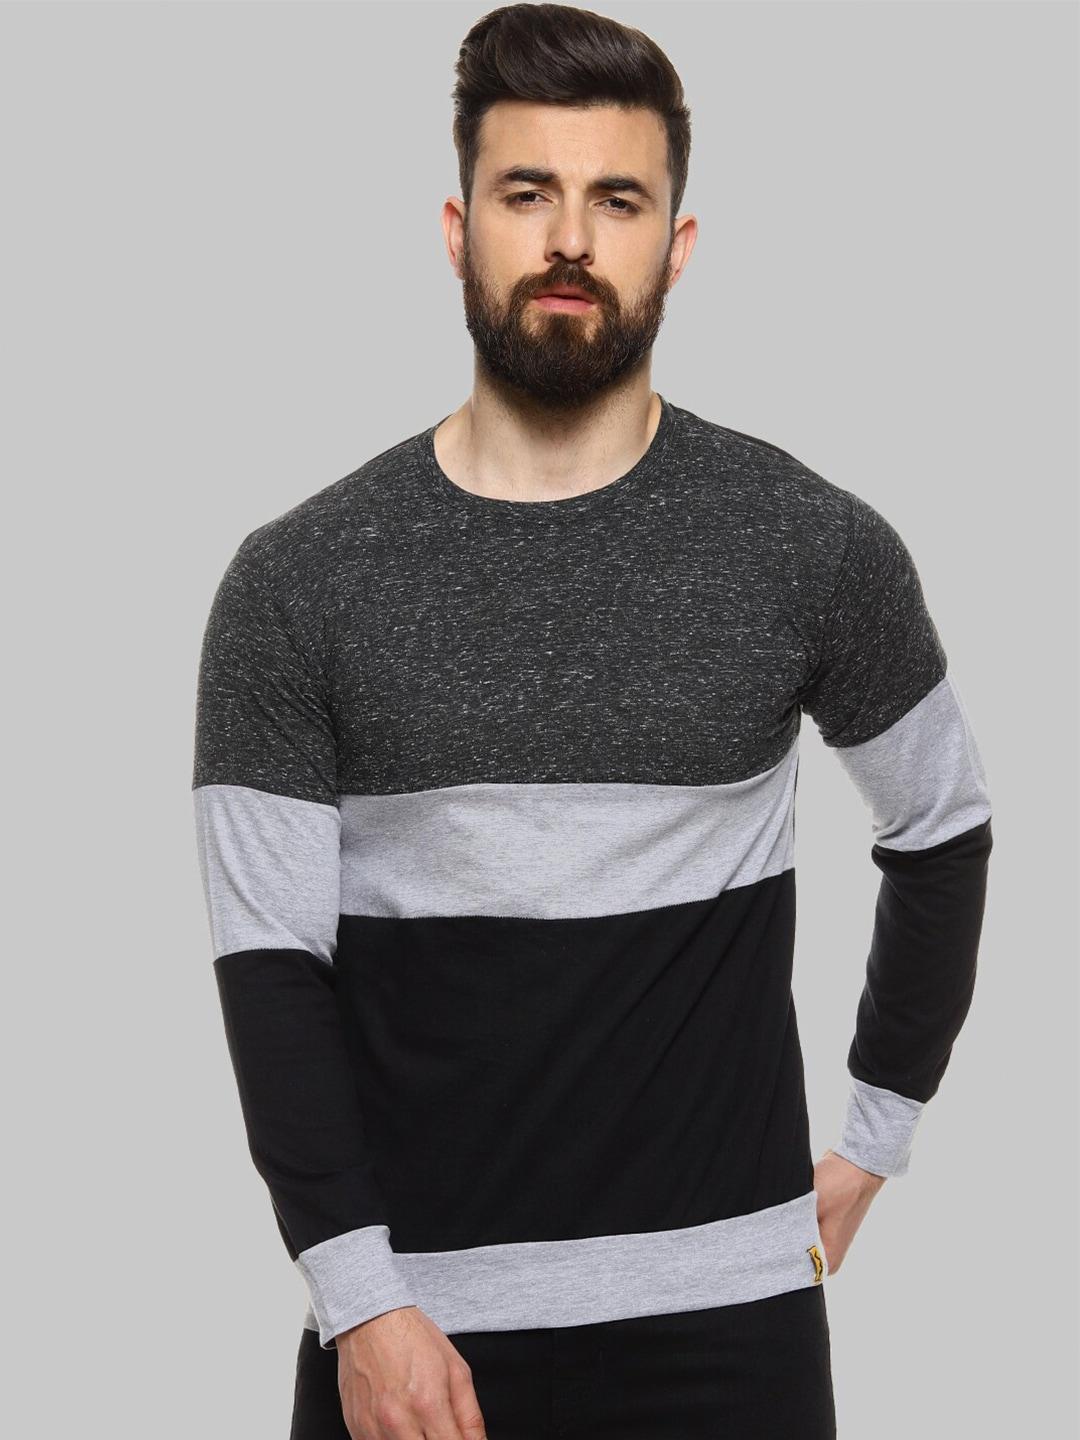 campus sutra colourblocked round neck long sleeves casual t-shirt